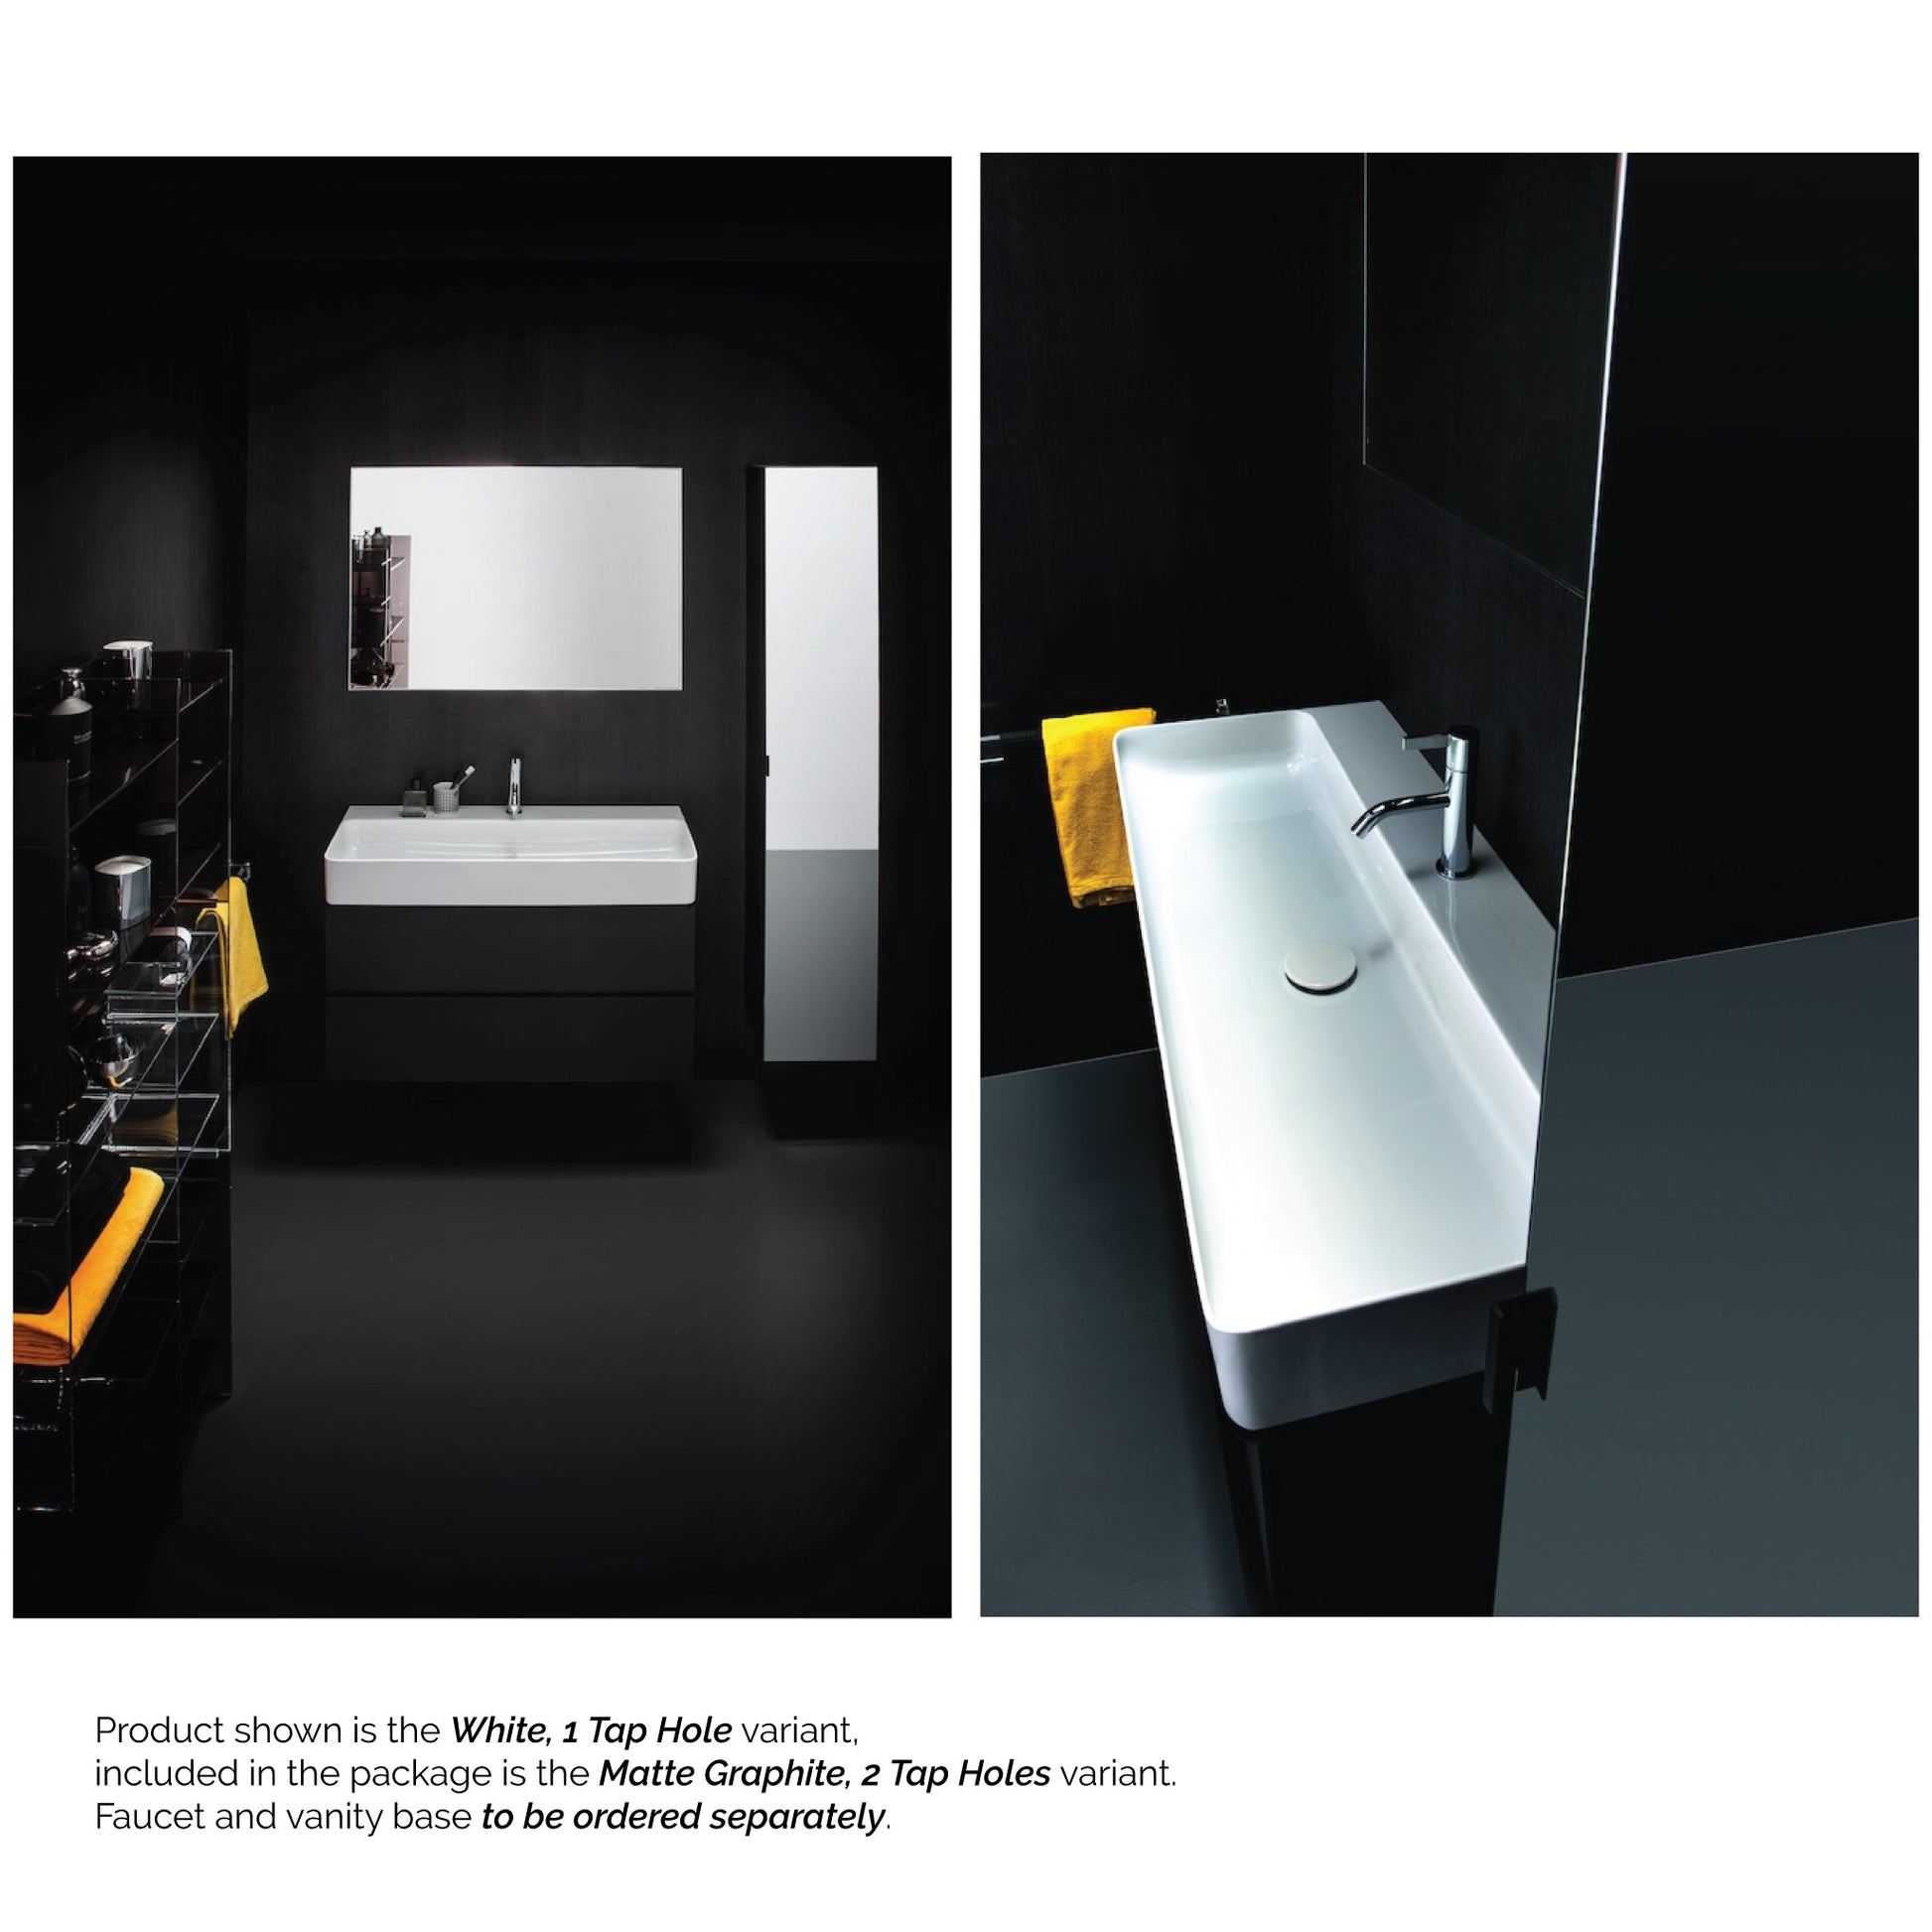 Laufen Val 37" x 17" Matte Graphite Ceramic Wall-Mounted Trough Bathroom Sink With 2 Faucet Holes